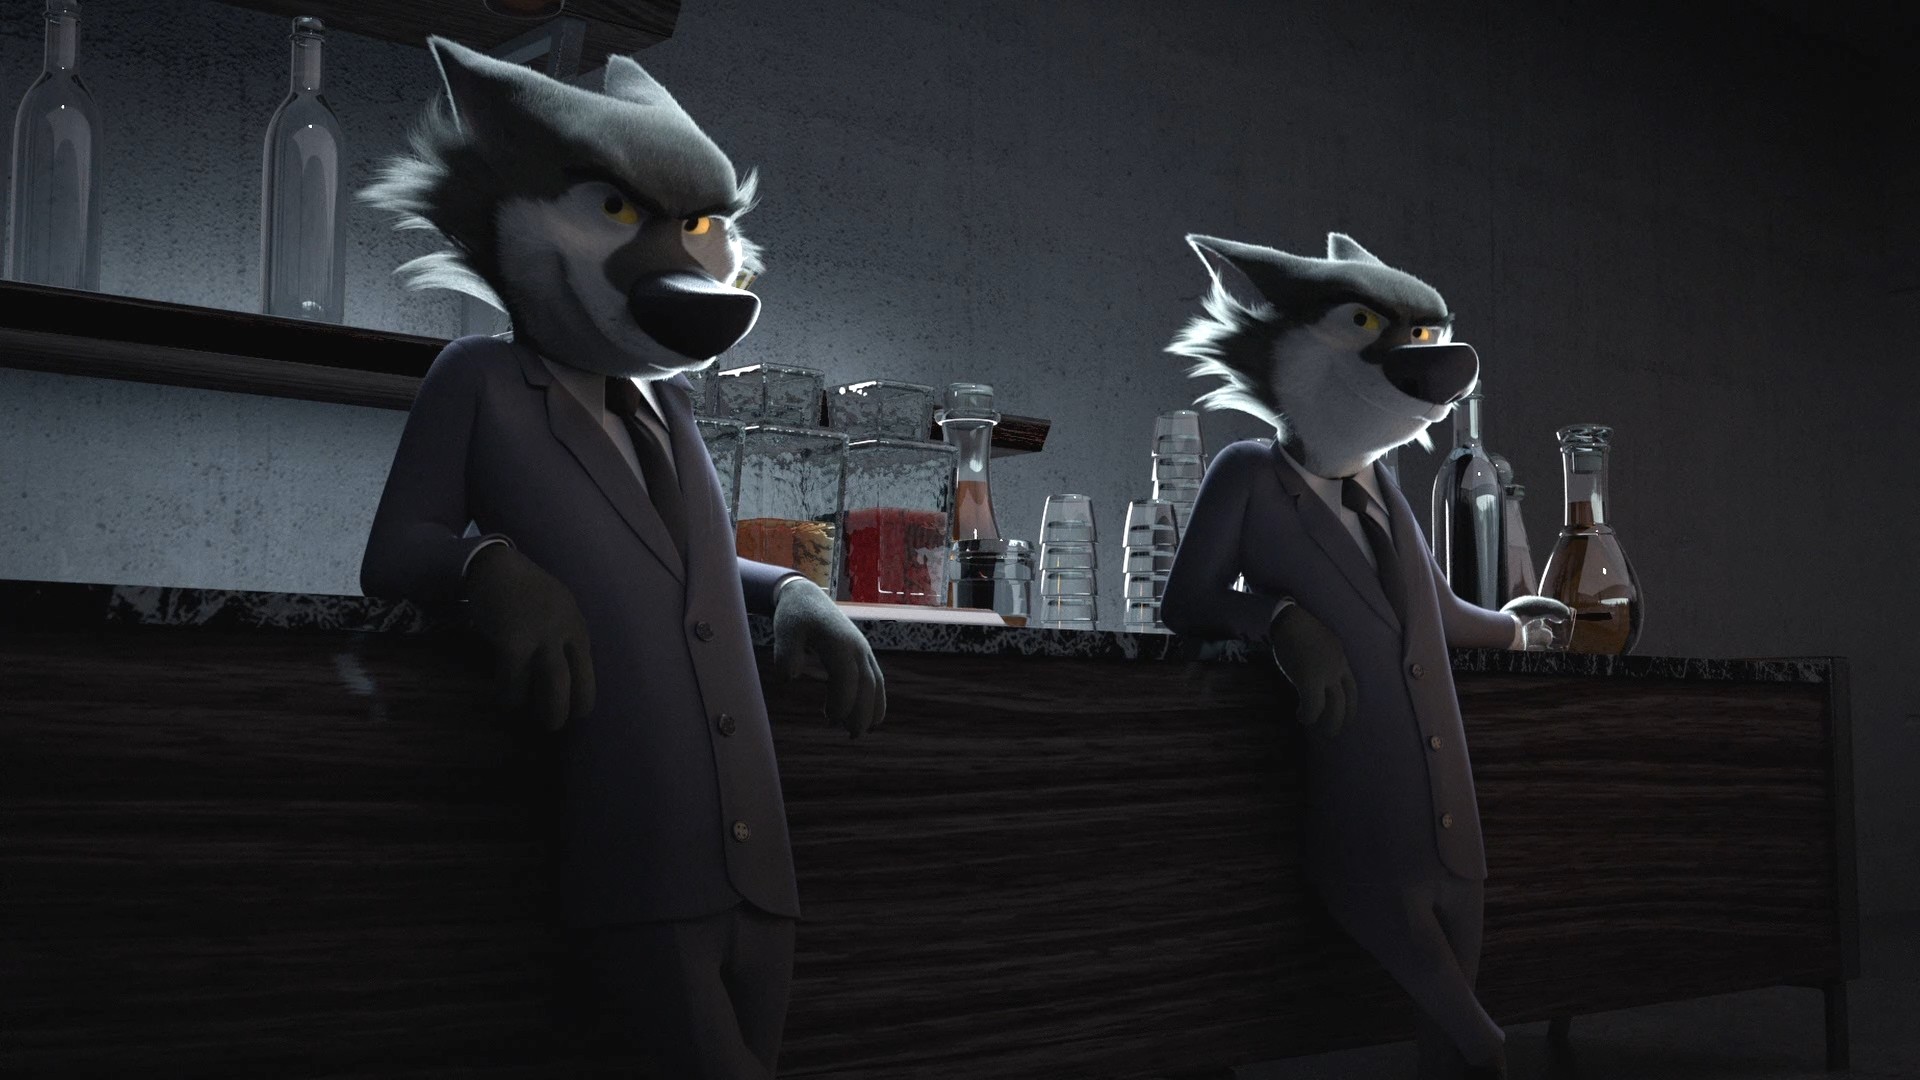 General 1920x1080 wolf Anthro animals CGI cartoon movies suits clothing tie gangster screen shot Rock Dog cigars